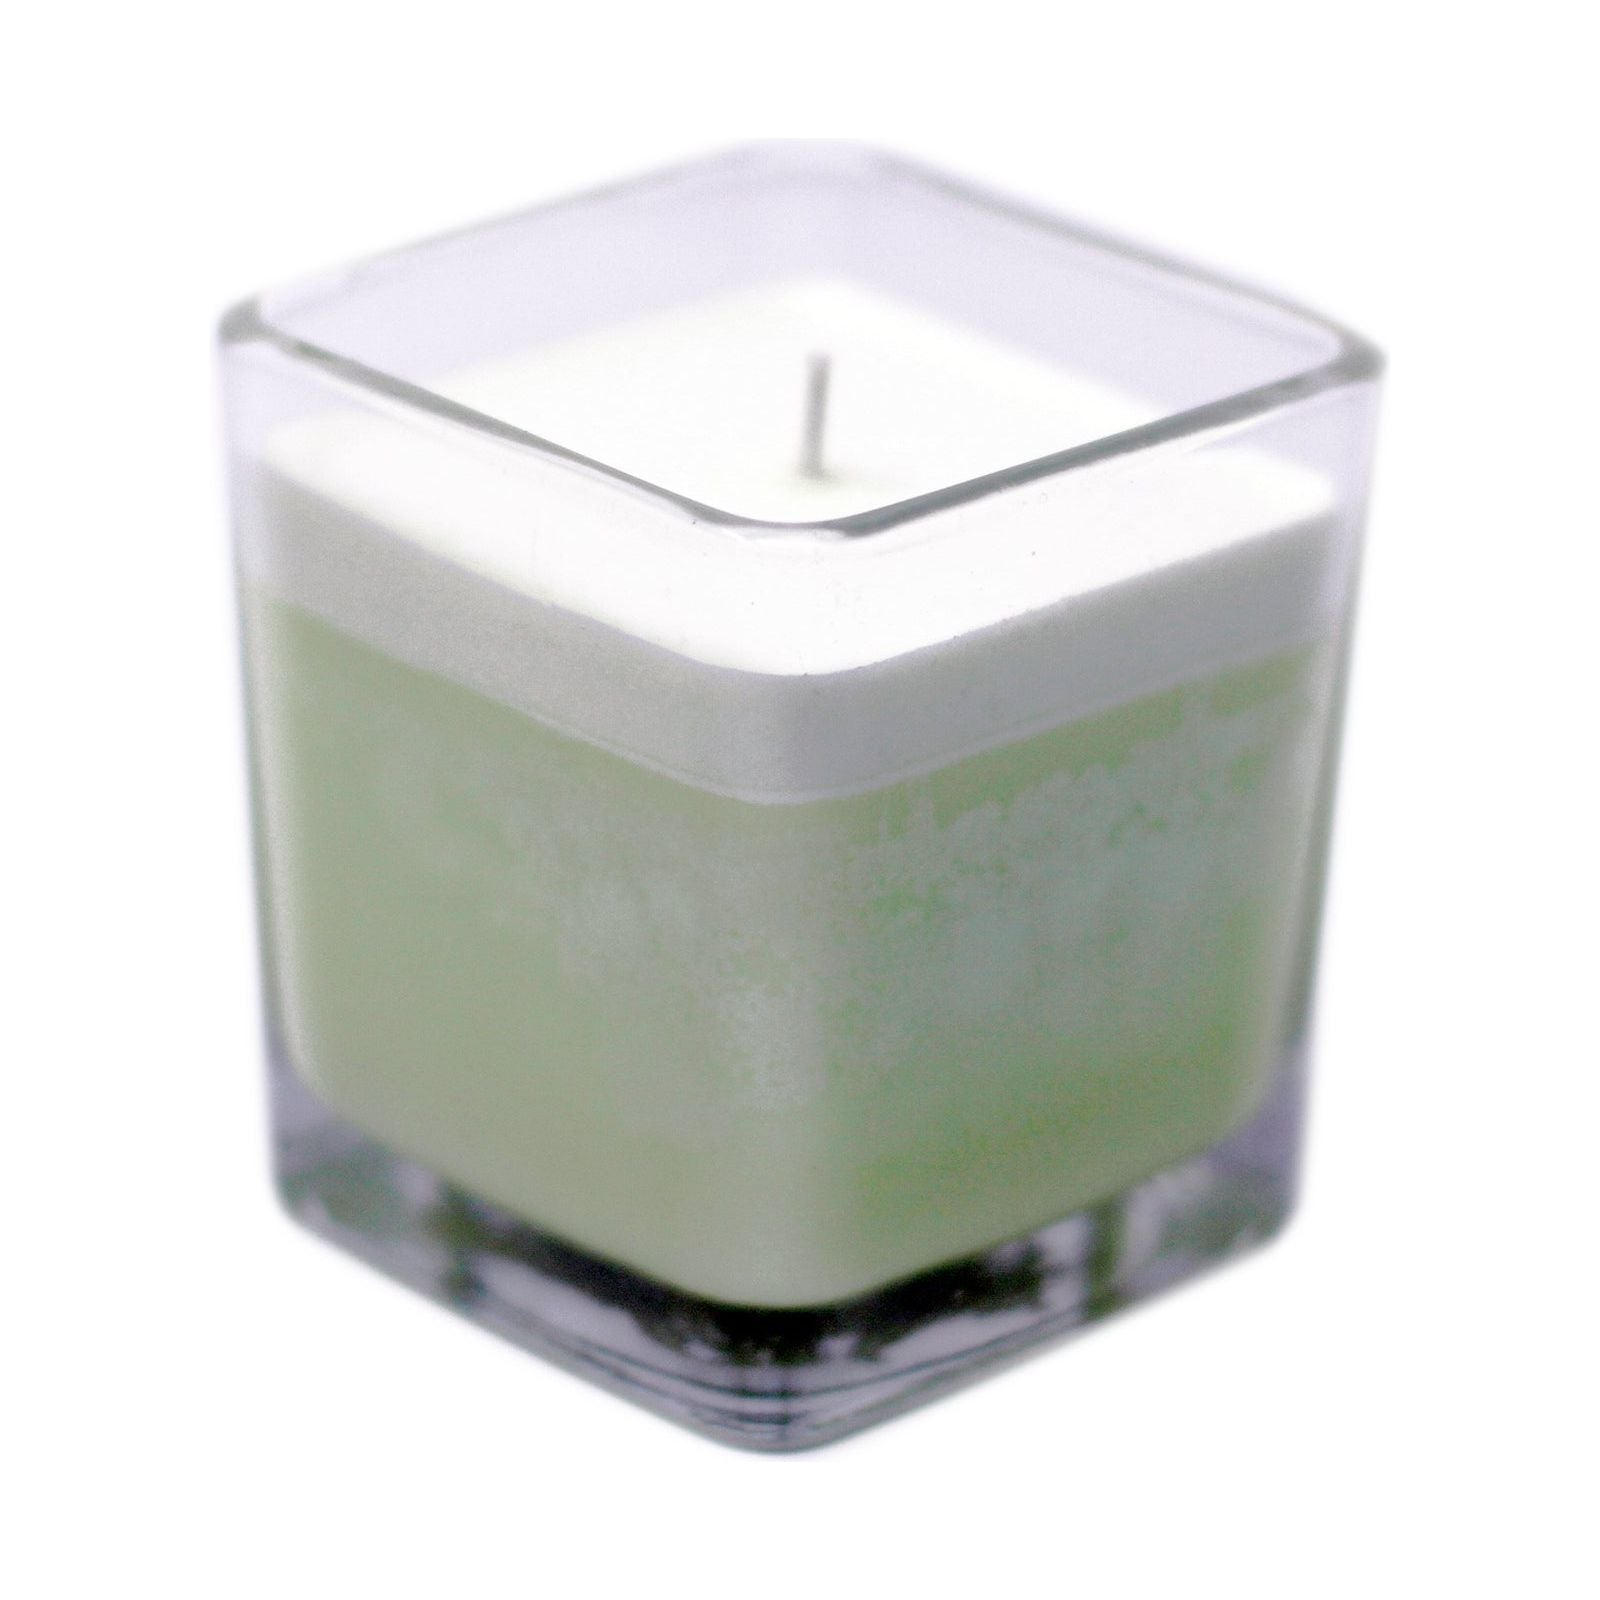 Soy Wax Jar Candle - Cucumber & Mint - Ashton and Finch